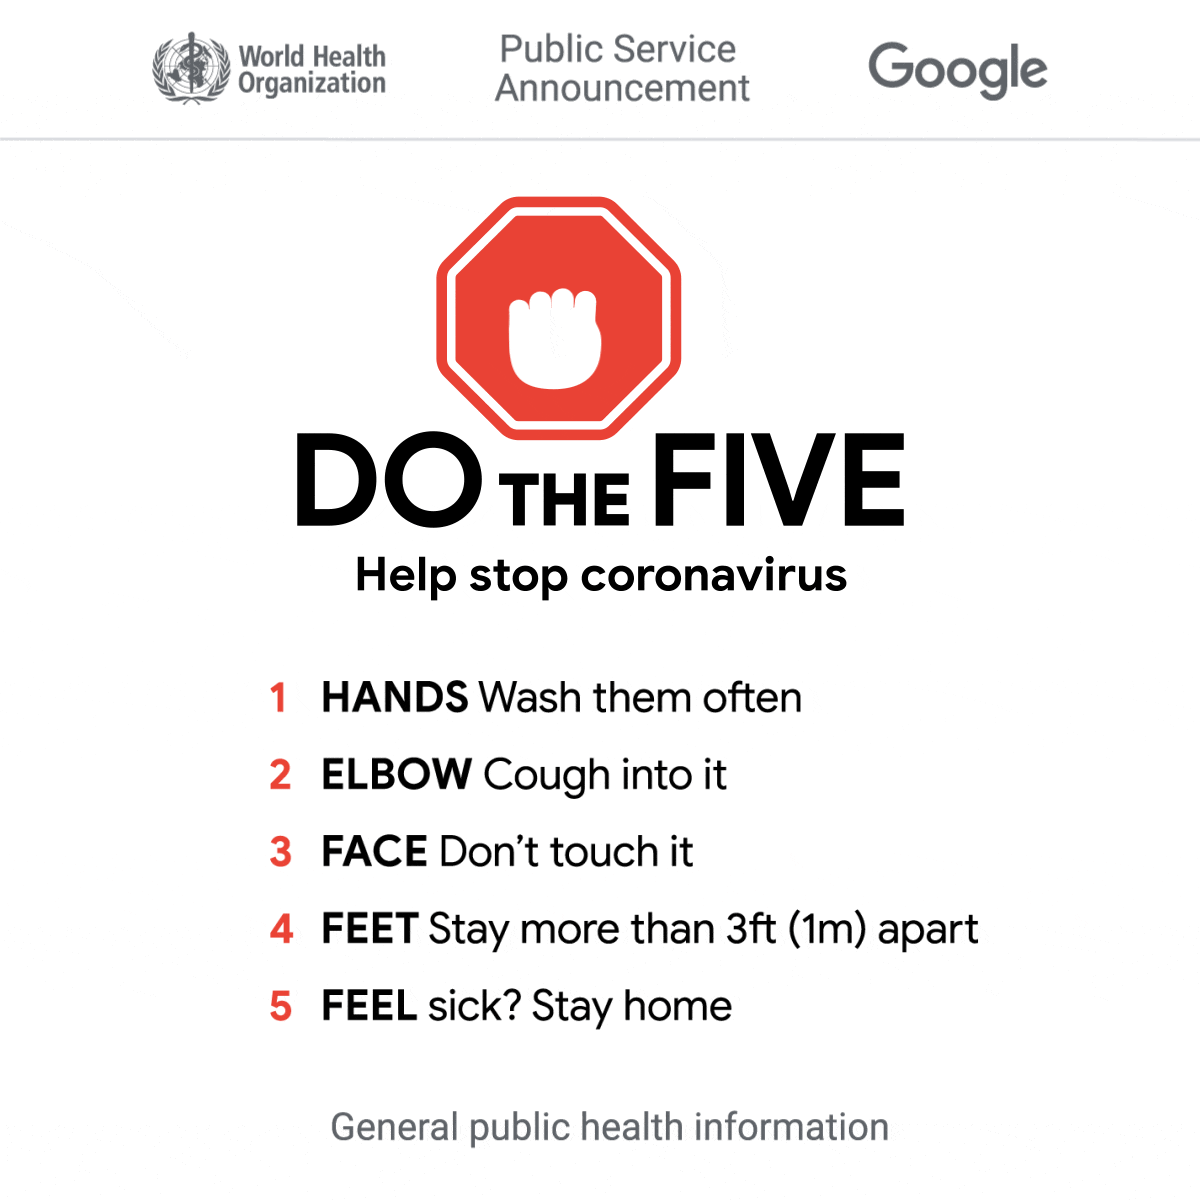 “Do the Five” raises awareness of simple measures people can take to slow the spread of the disease, according to the World Health Organization.